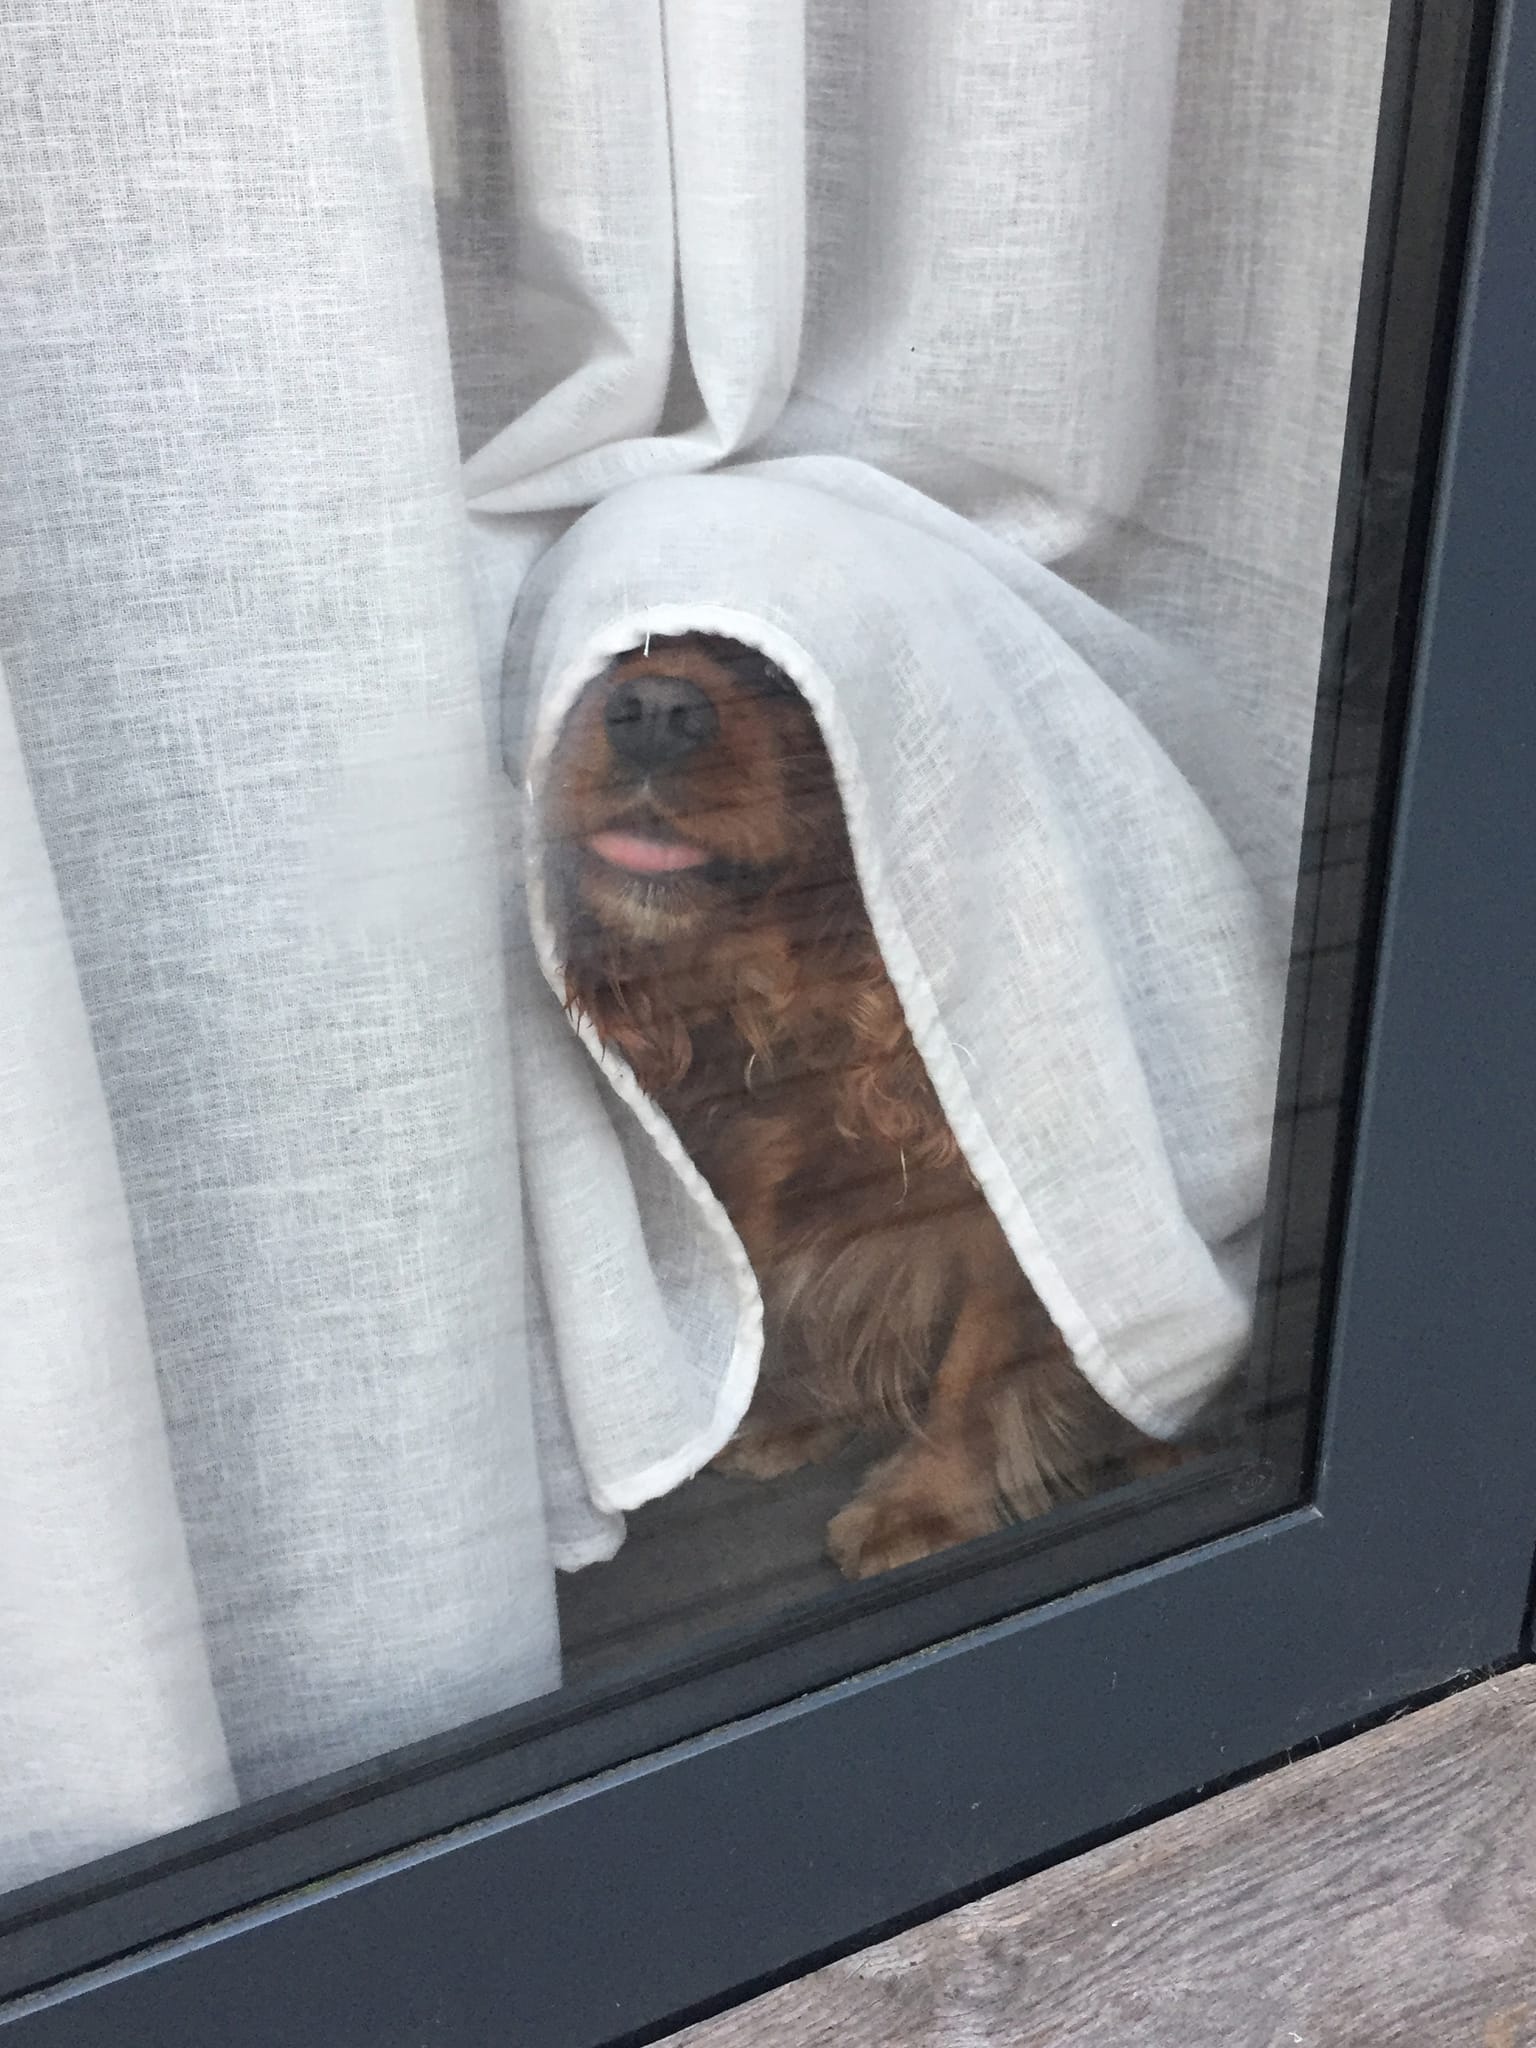 A dog peeking out a window from under a curtain